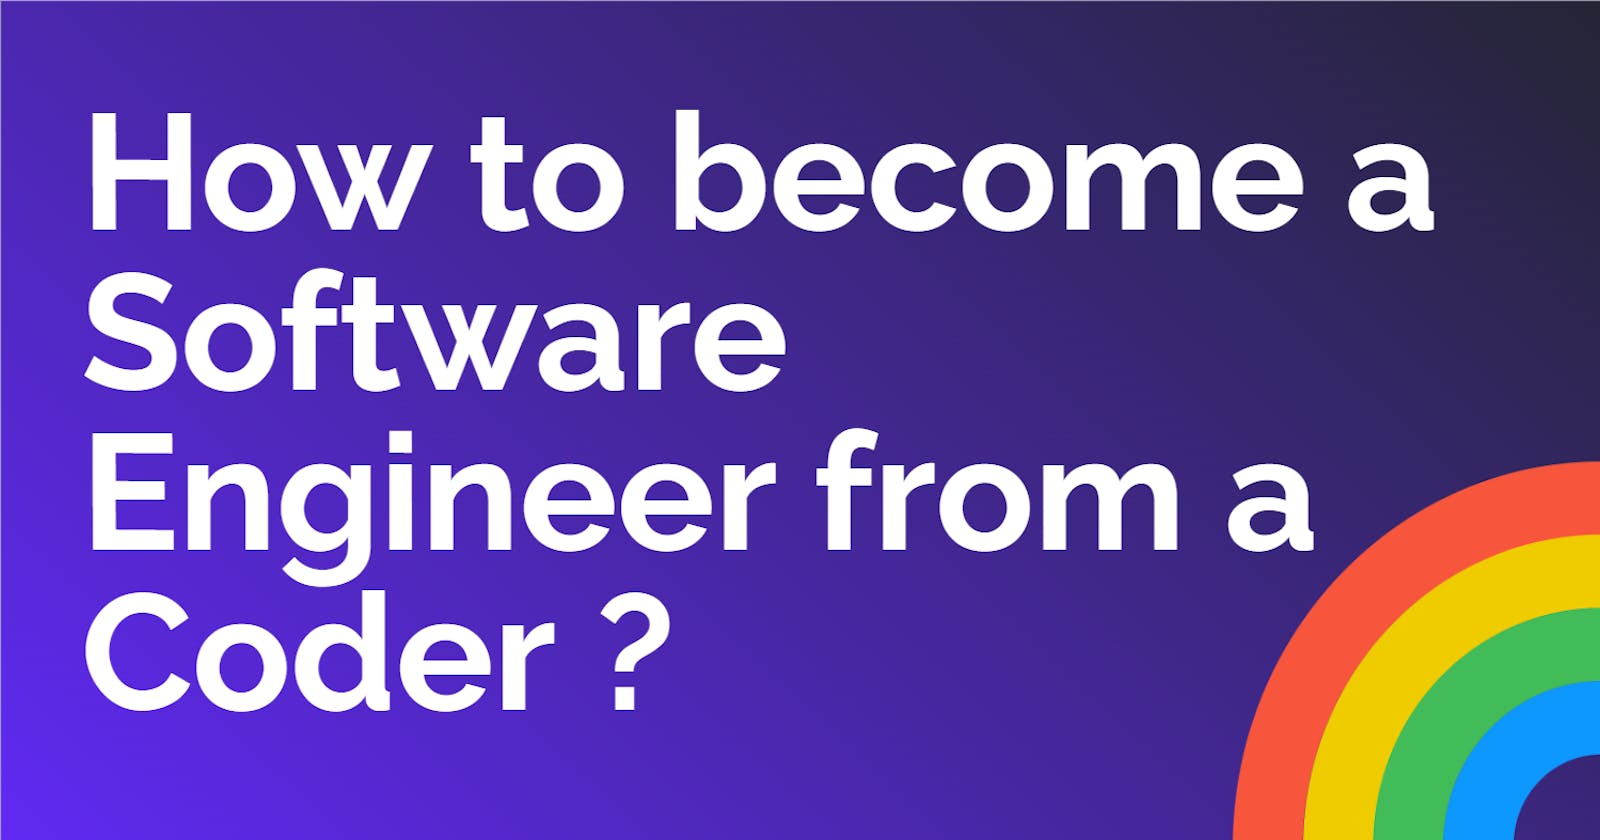 How to become a Software Engineer from a Coder ?